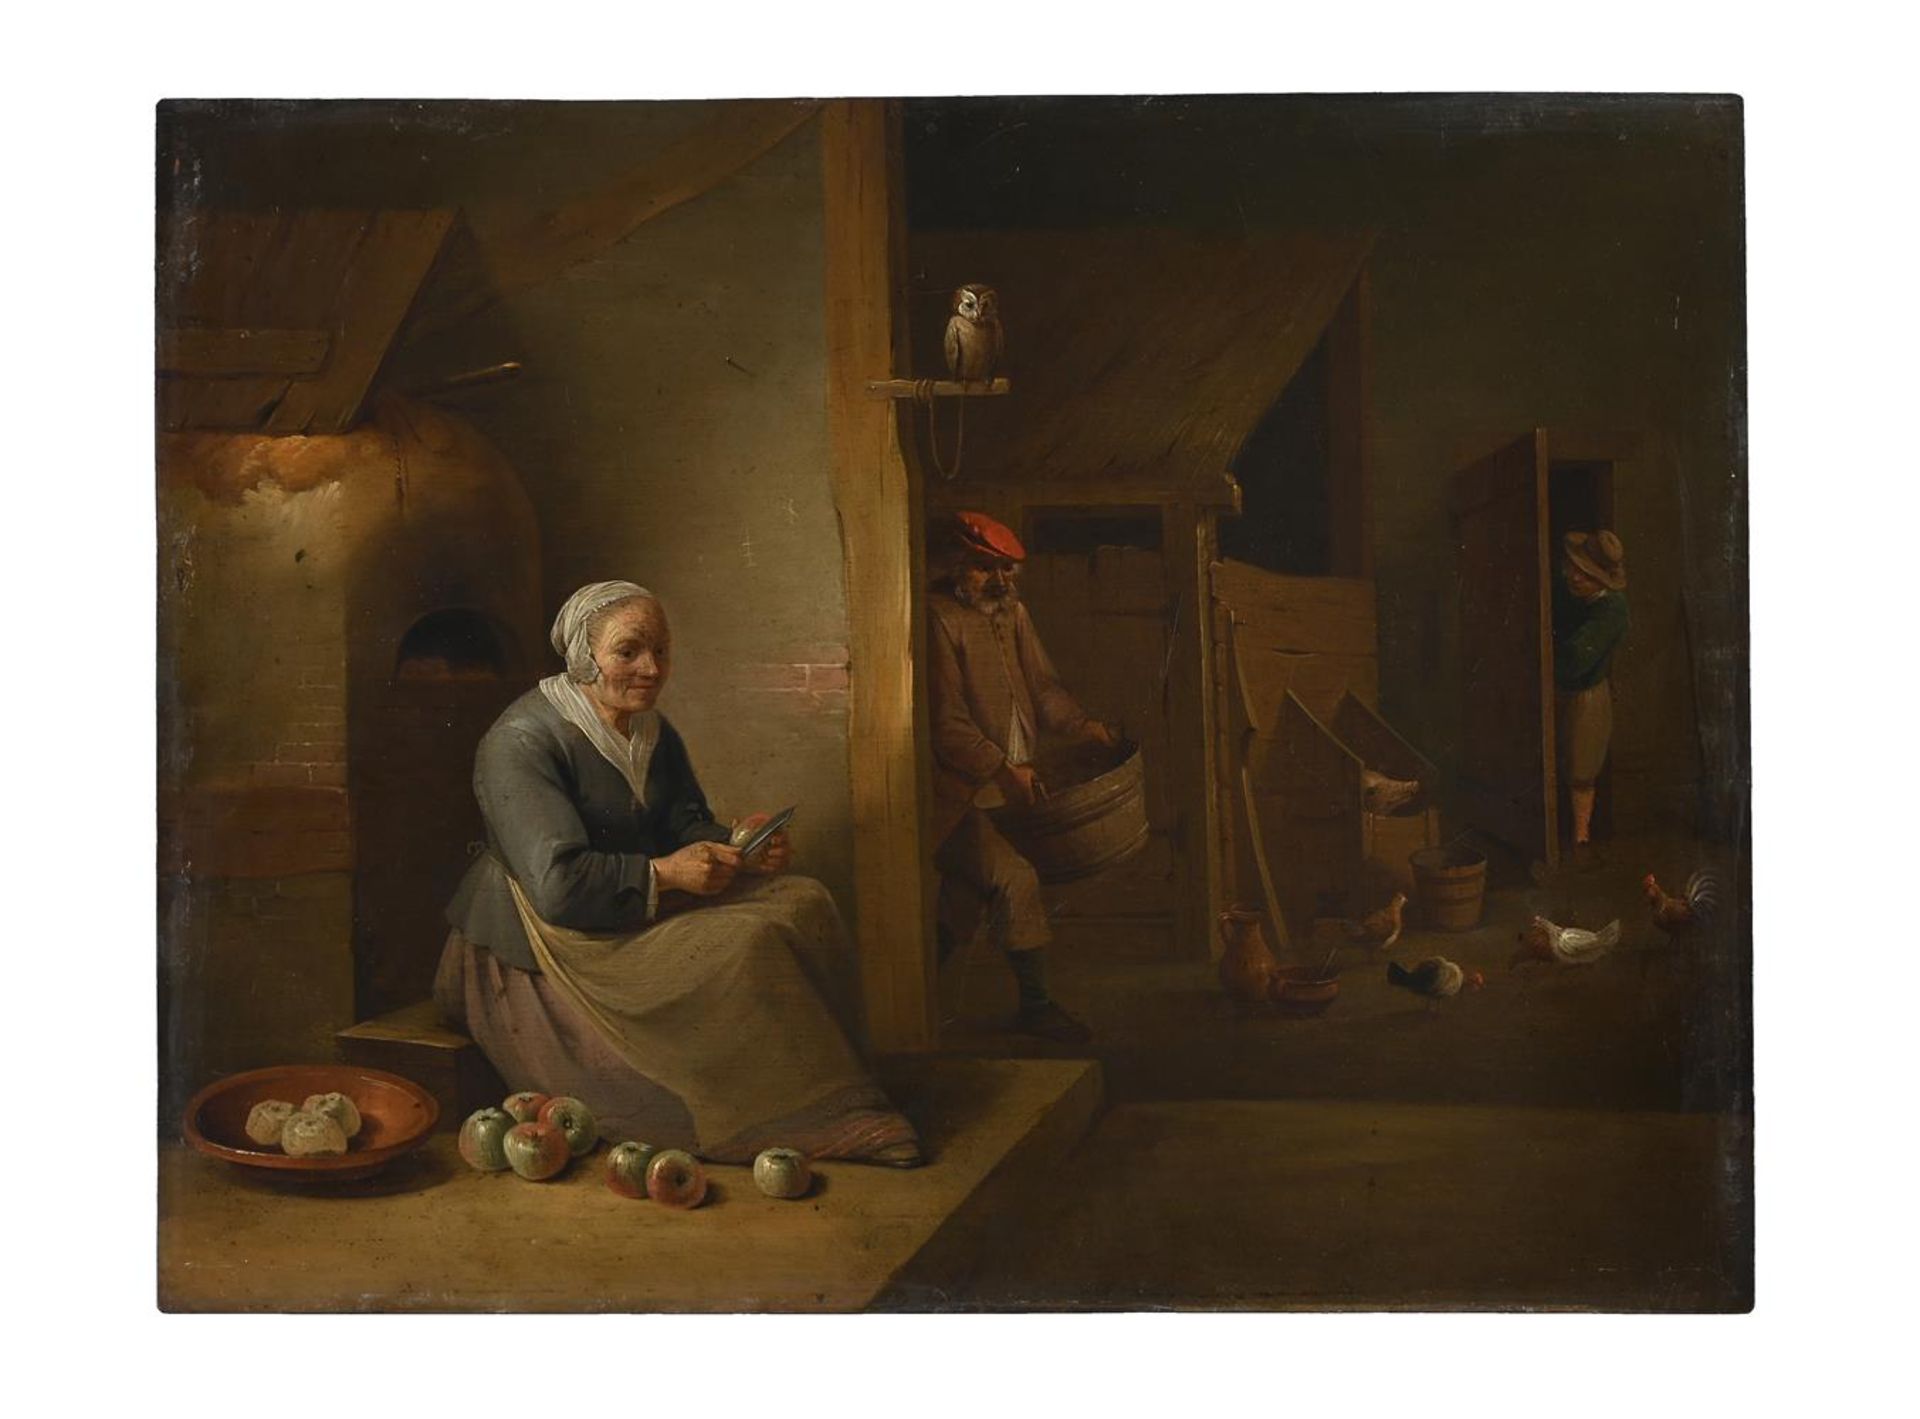 AFTER DAVID TENIERS THE YOUNGER, INTERIOR WITH AN OLD WOMAN PEELING APPLES - Image 2 of 3